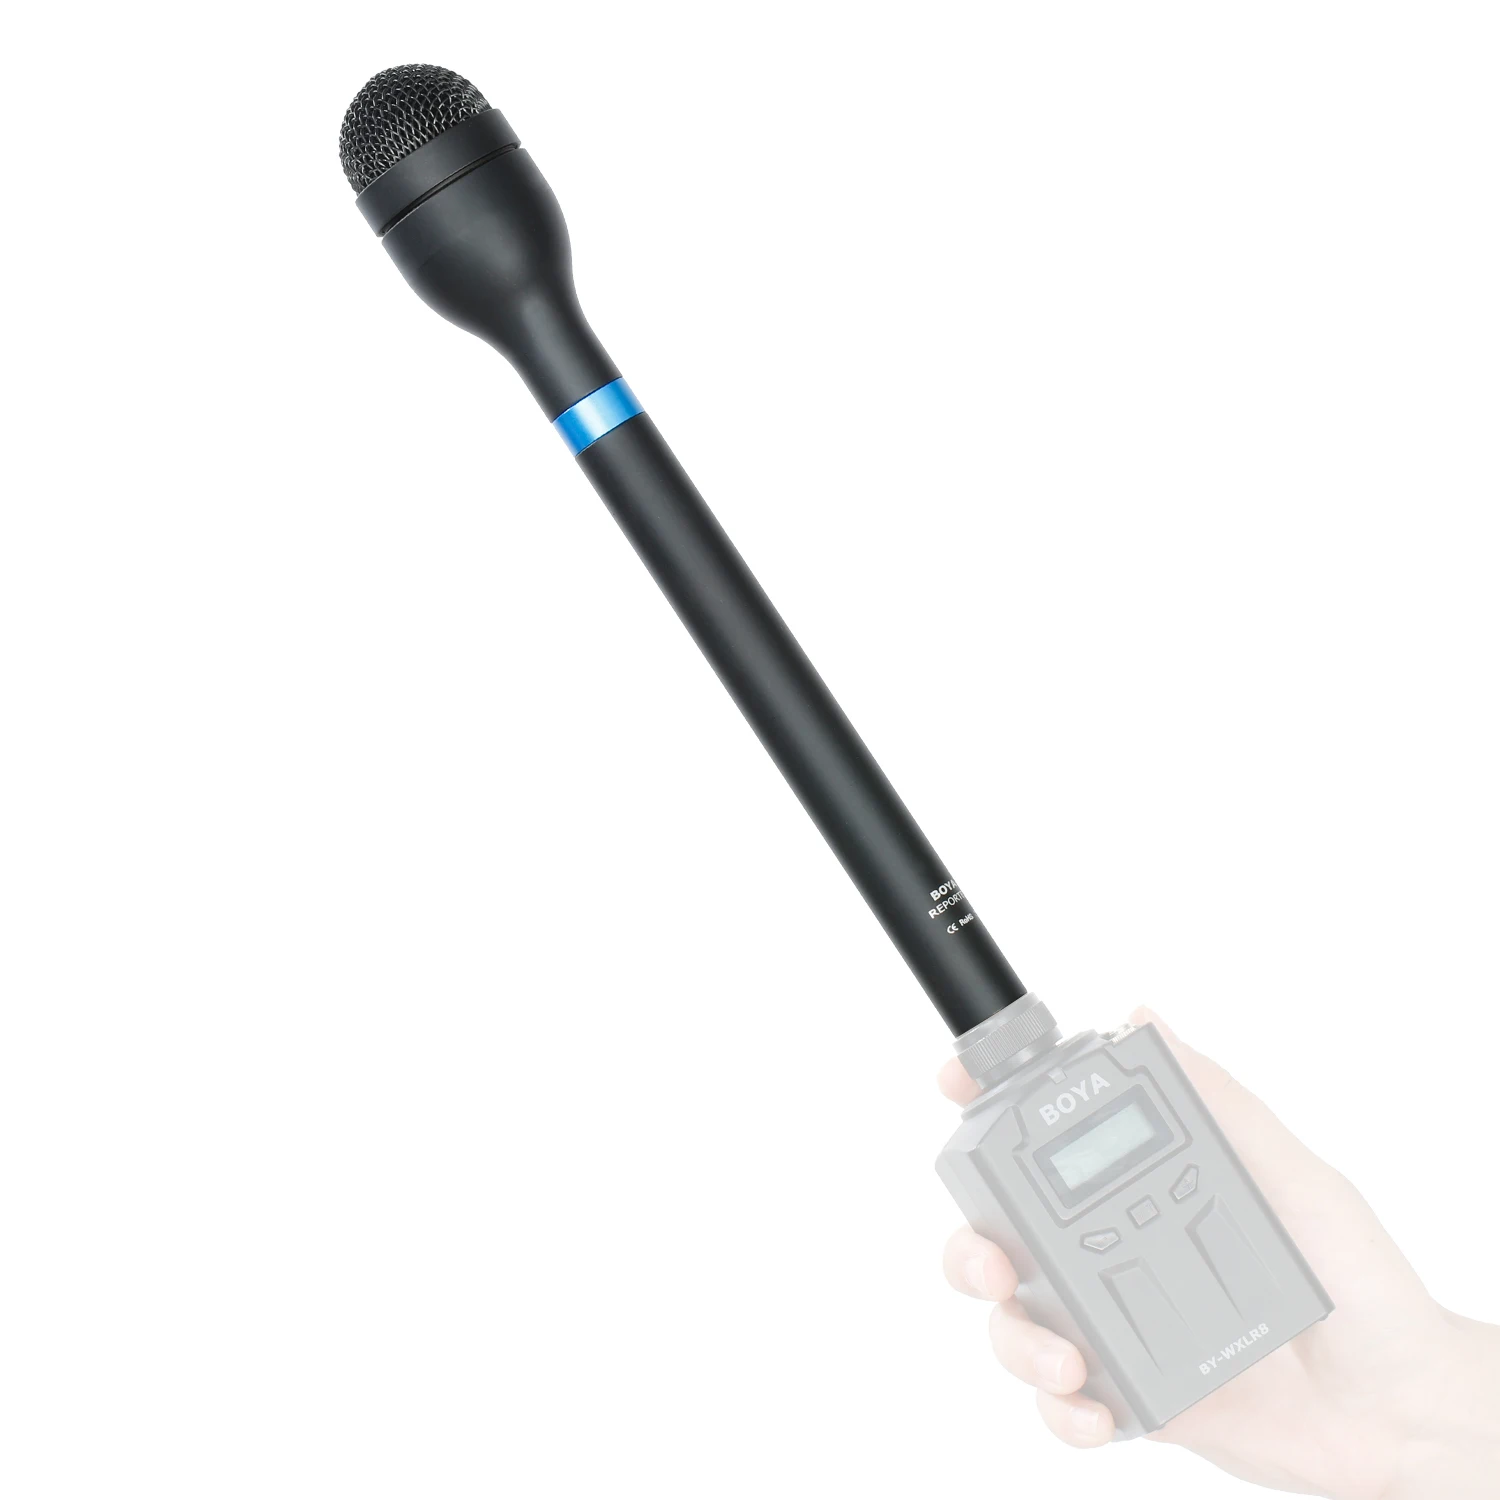 BOYA BY-HM100 XLR Dynamic Omni-Directional Wireless Handheld Microphone for ENG Interviews News Gathering Video Recoding Youtube enlarge